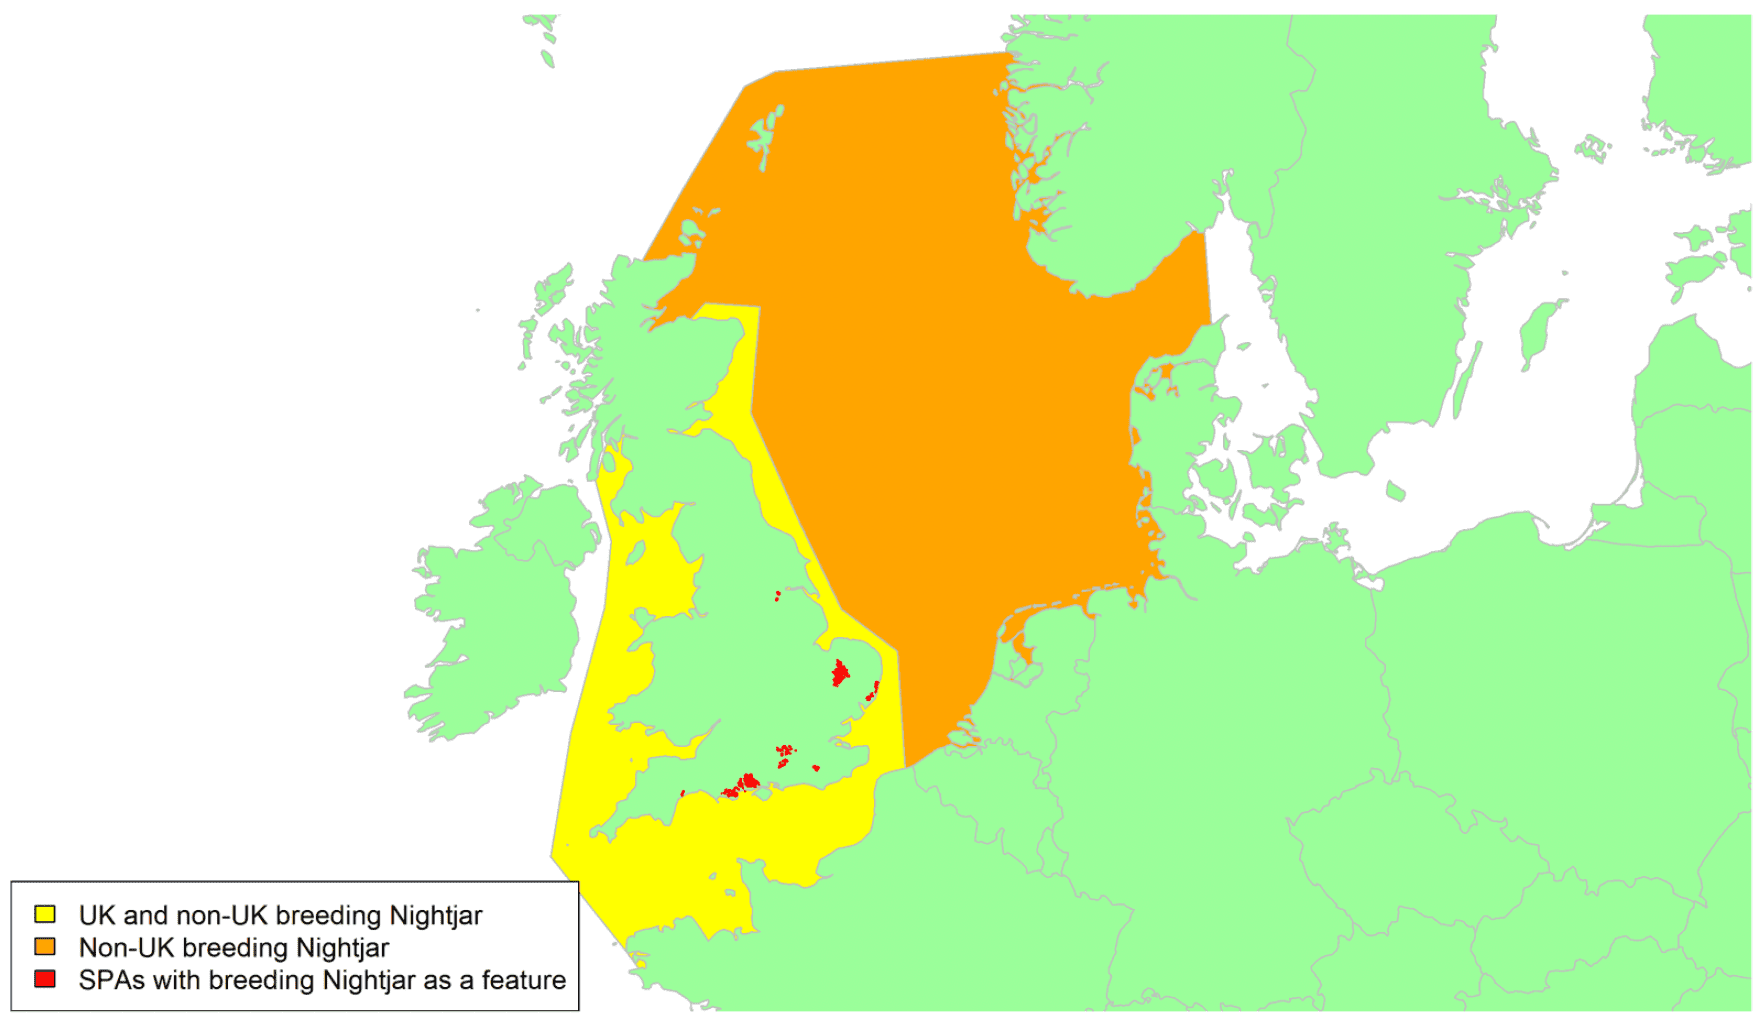 Map of North West Europe showing migratory routes and SPAs within the UK for Nightjar as described in the text below.